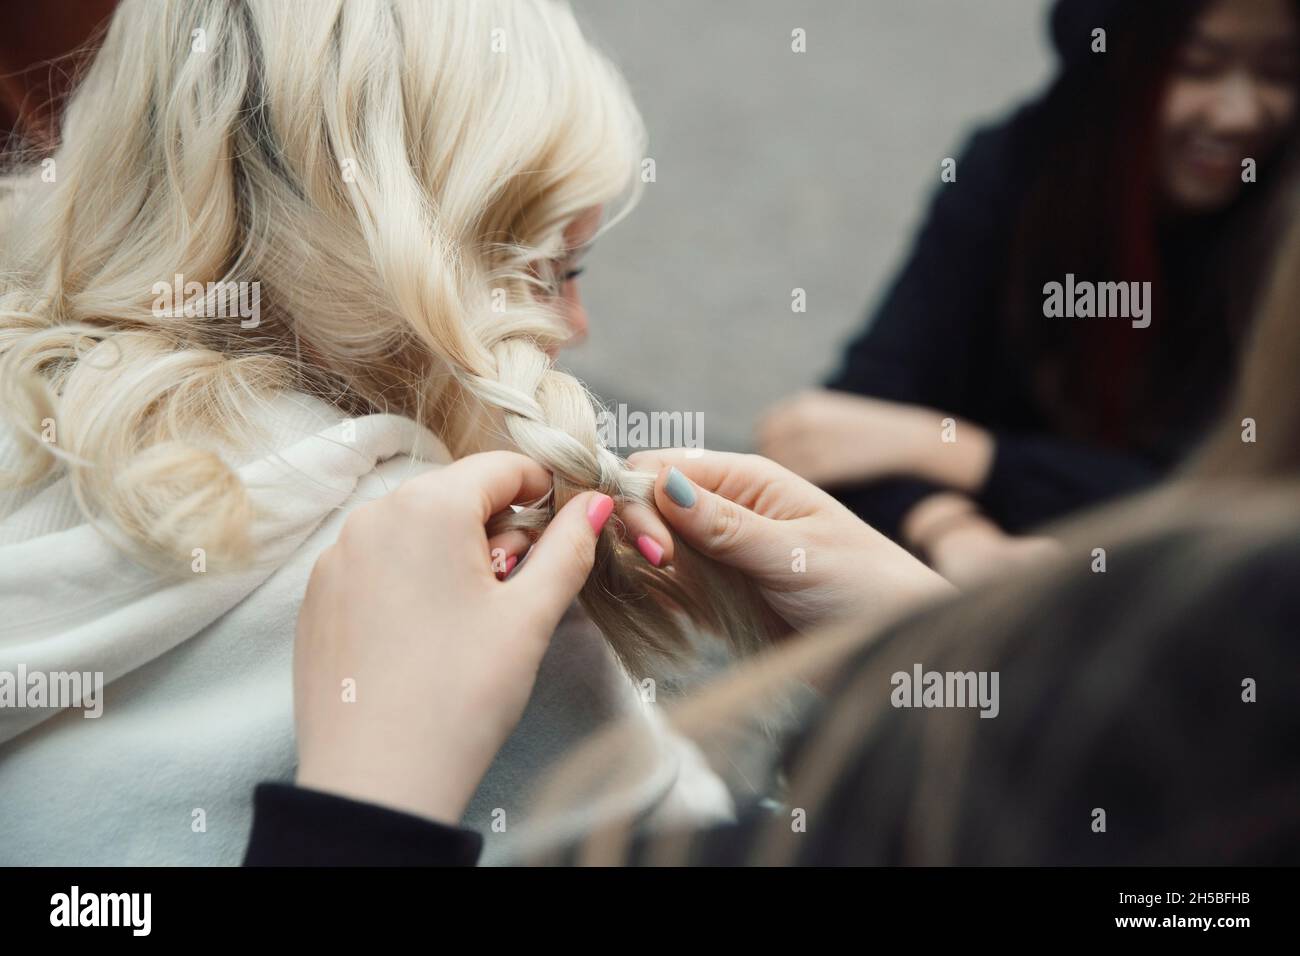 Cropped hands of girl braiding hair of female friend Stock Photo